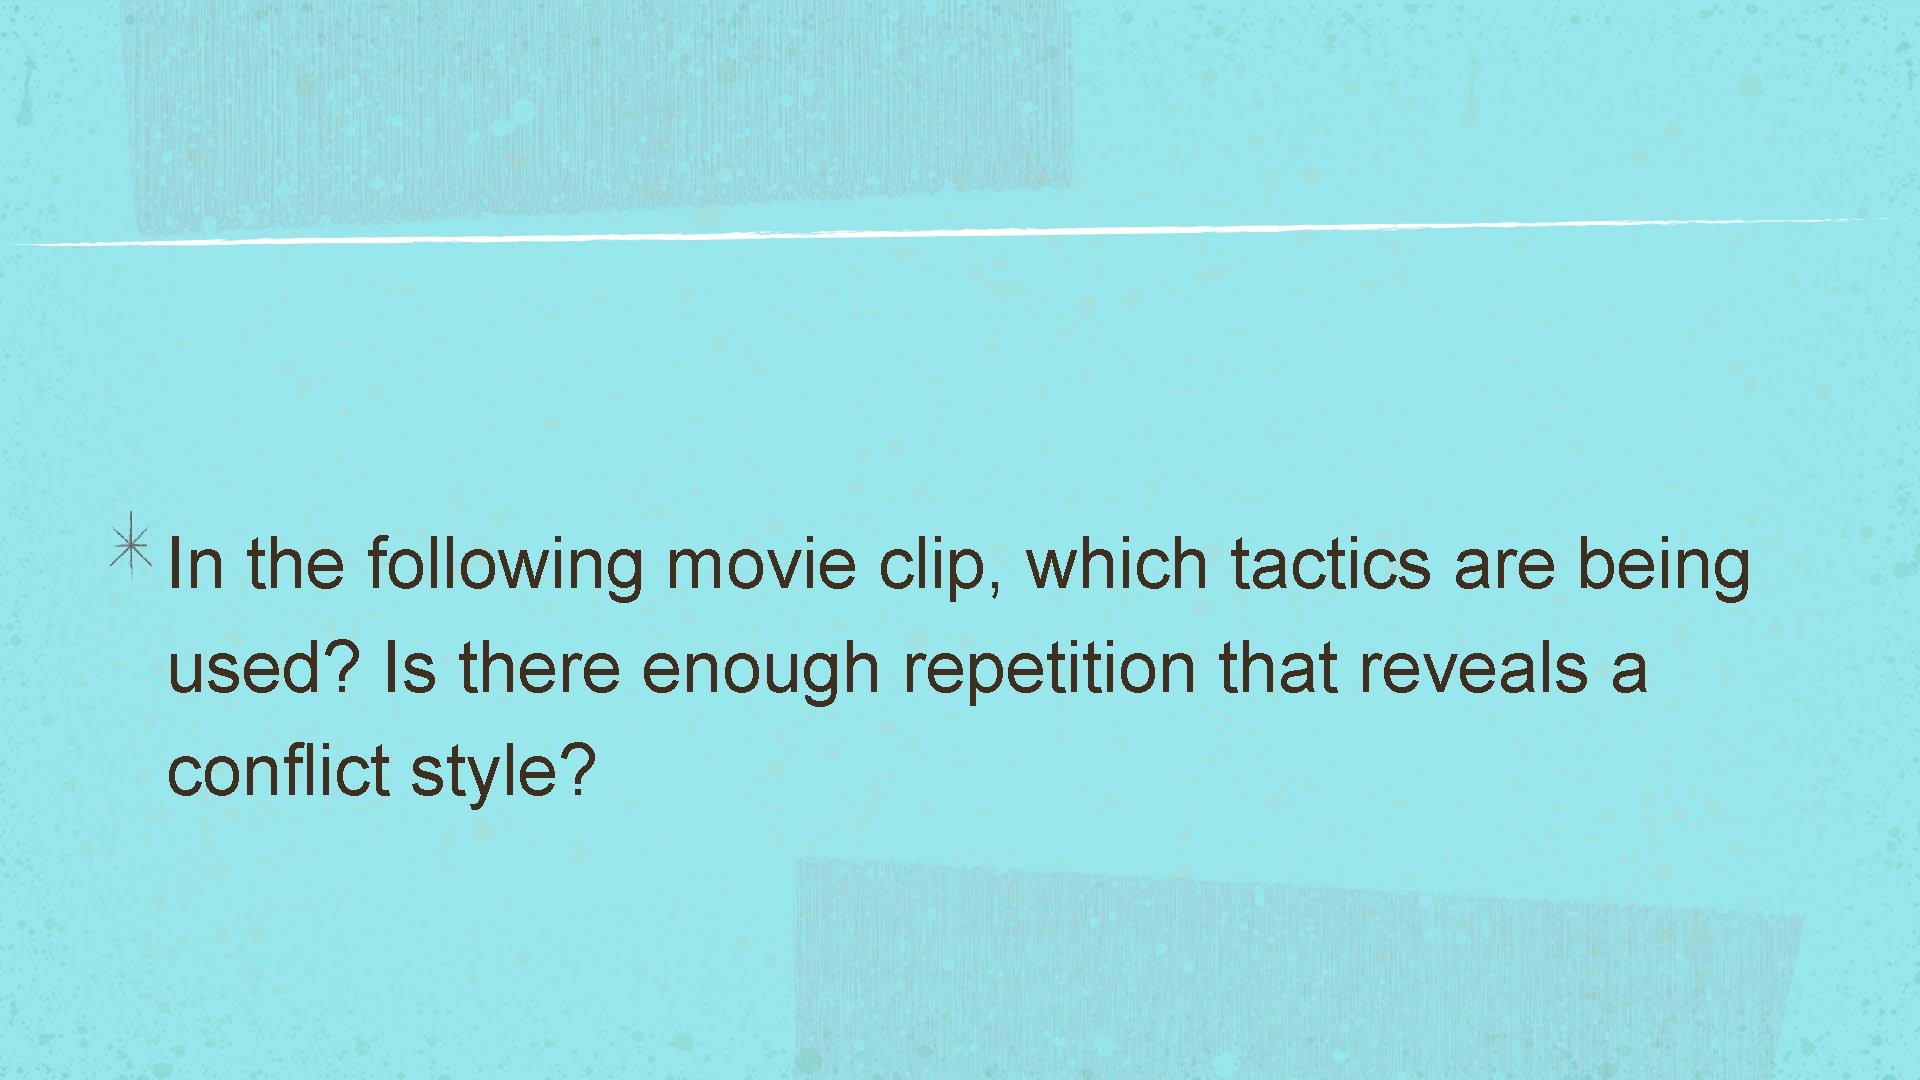 In the following movie clip, which tactics are being used? Is there enough repetition